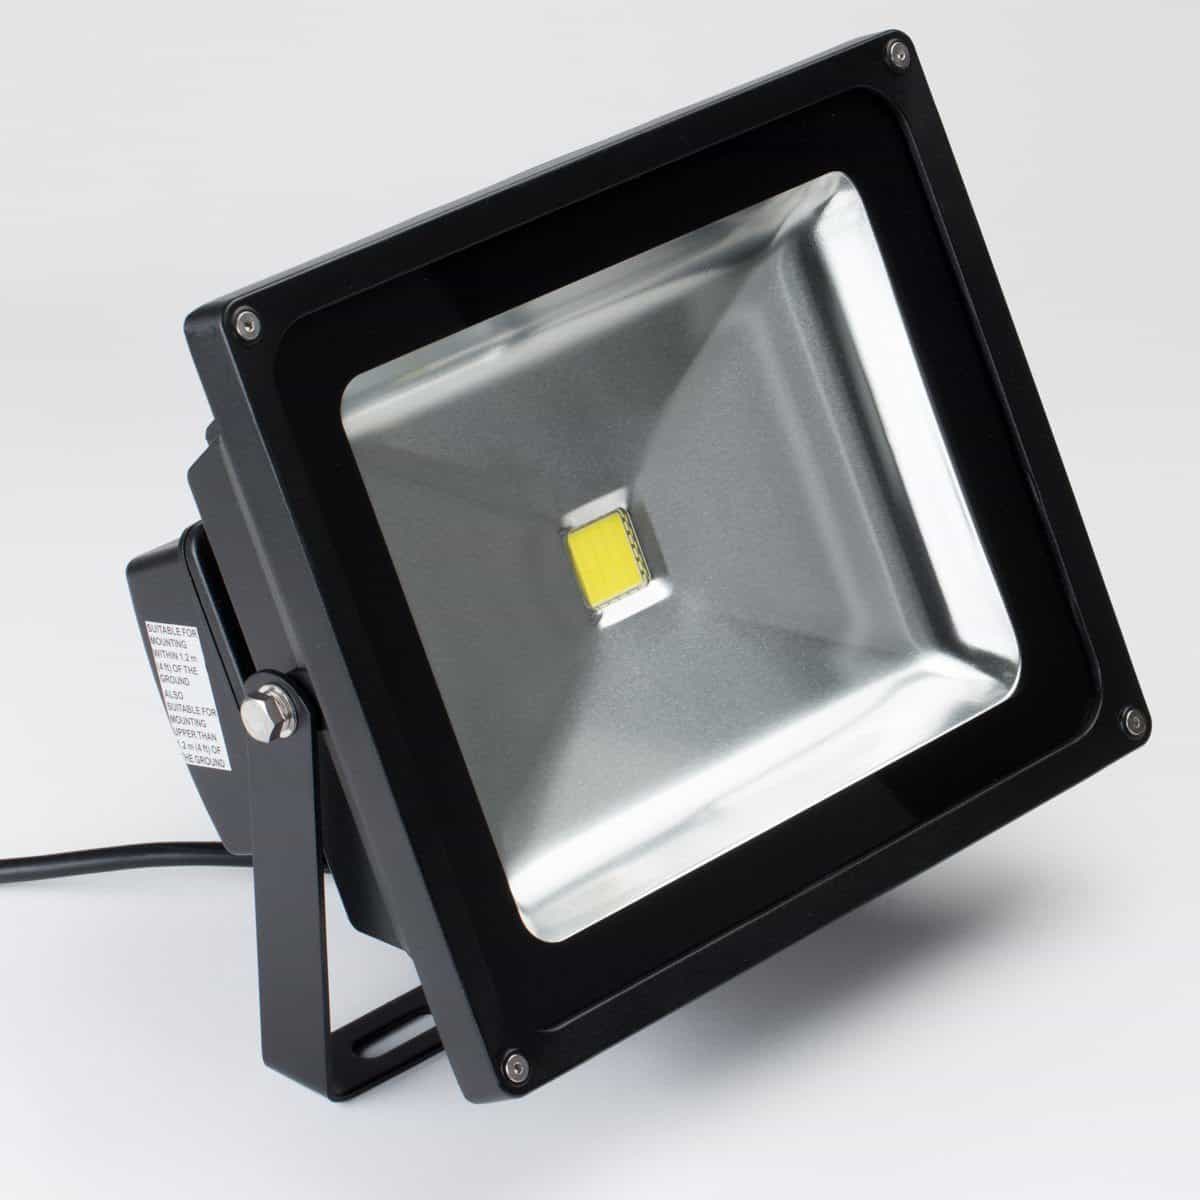 Load image into Gallery viewer, small led flood light in black housing with visible yellow chip in center
